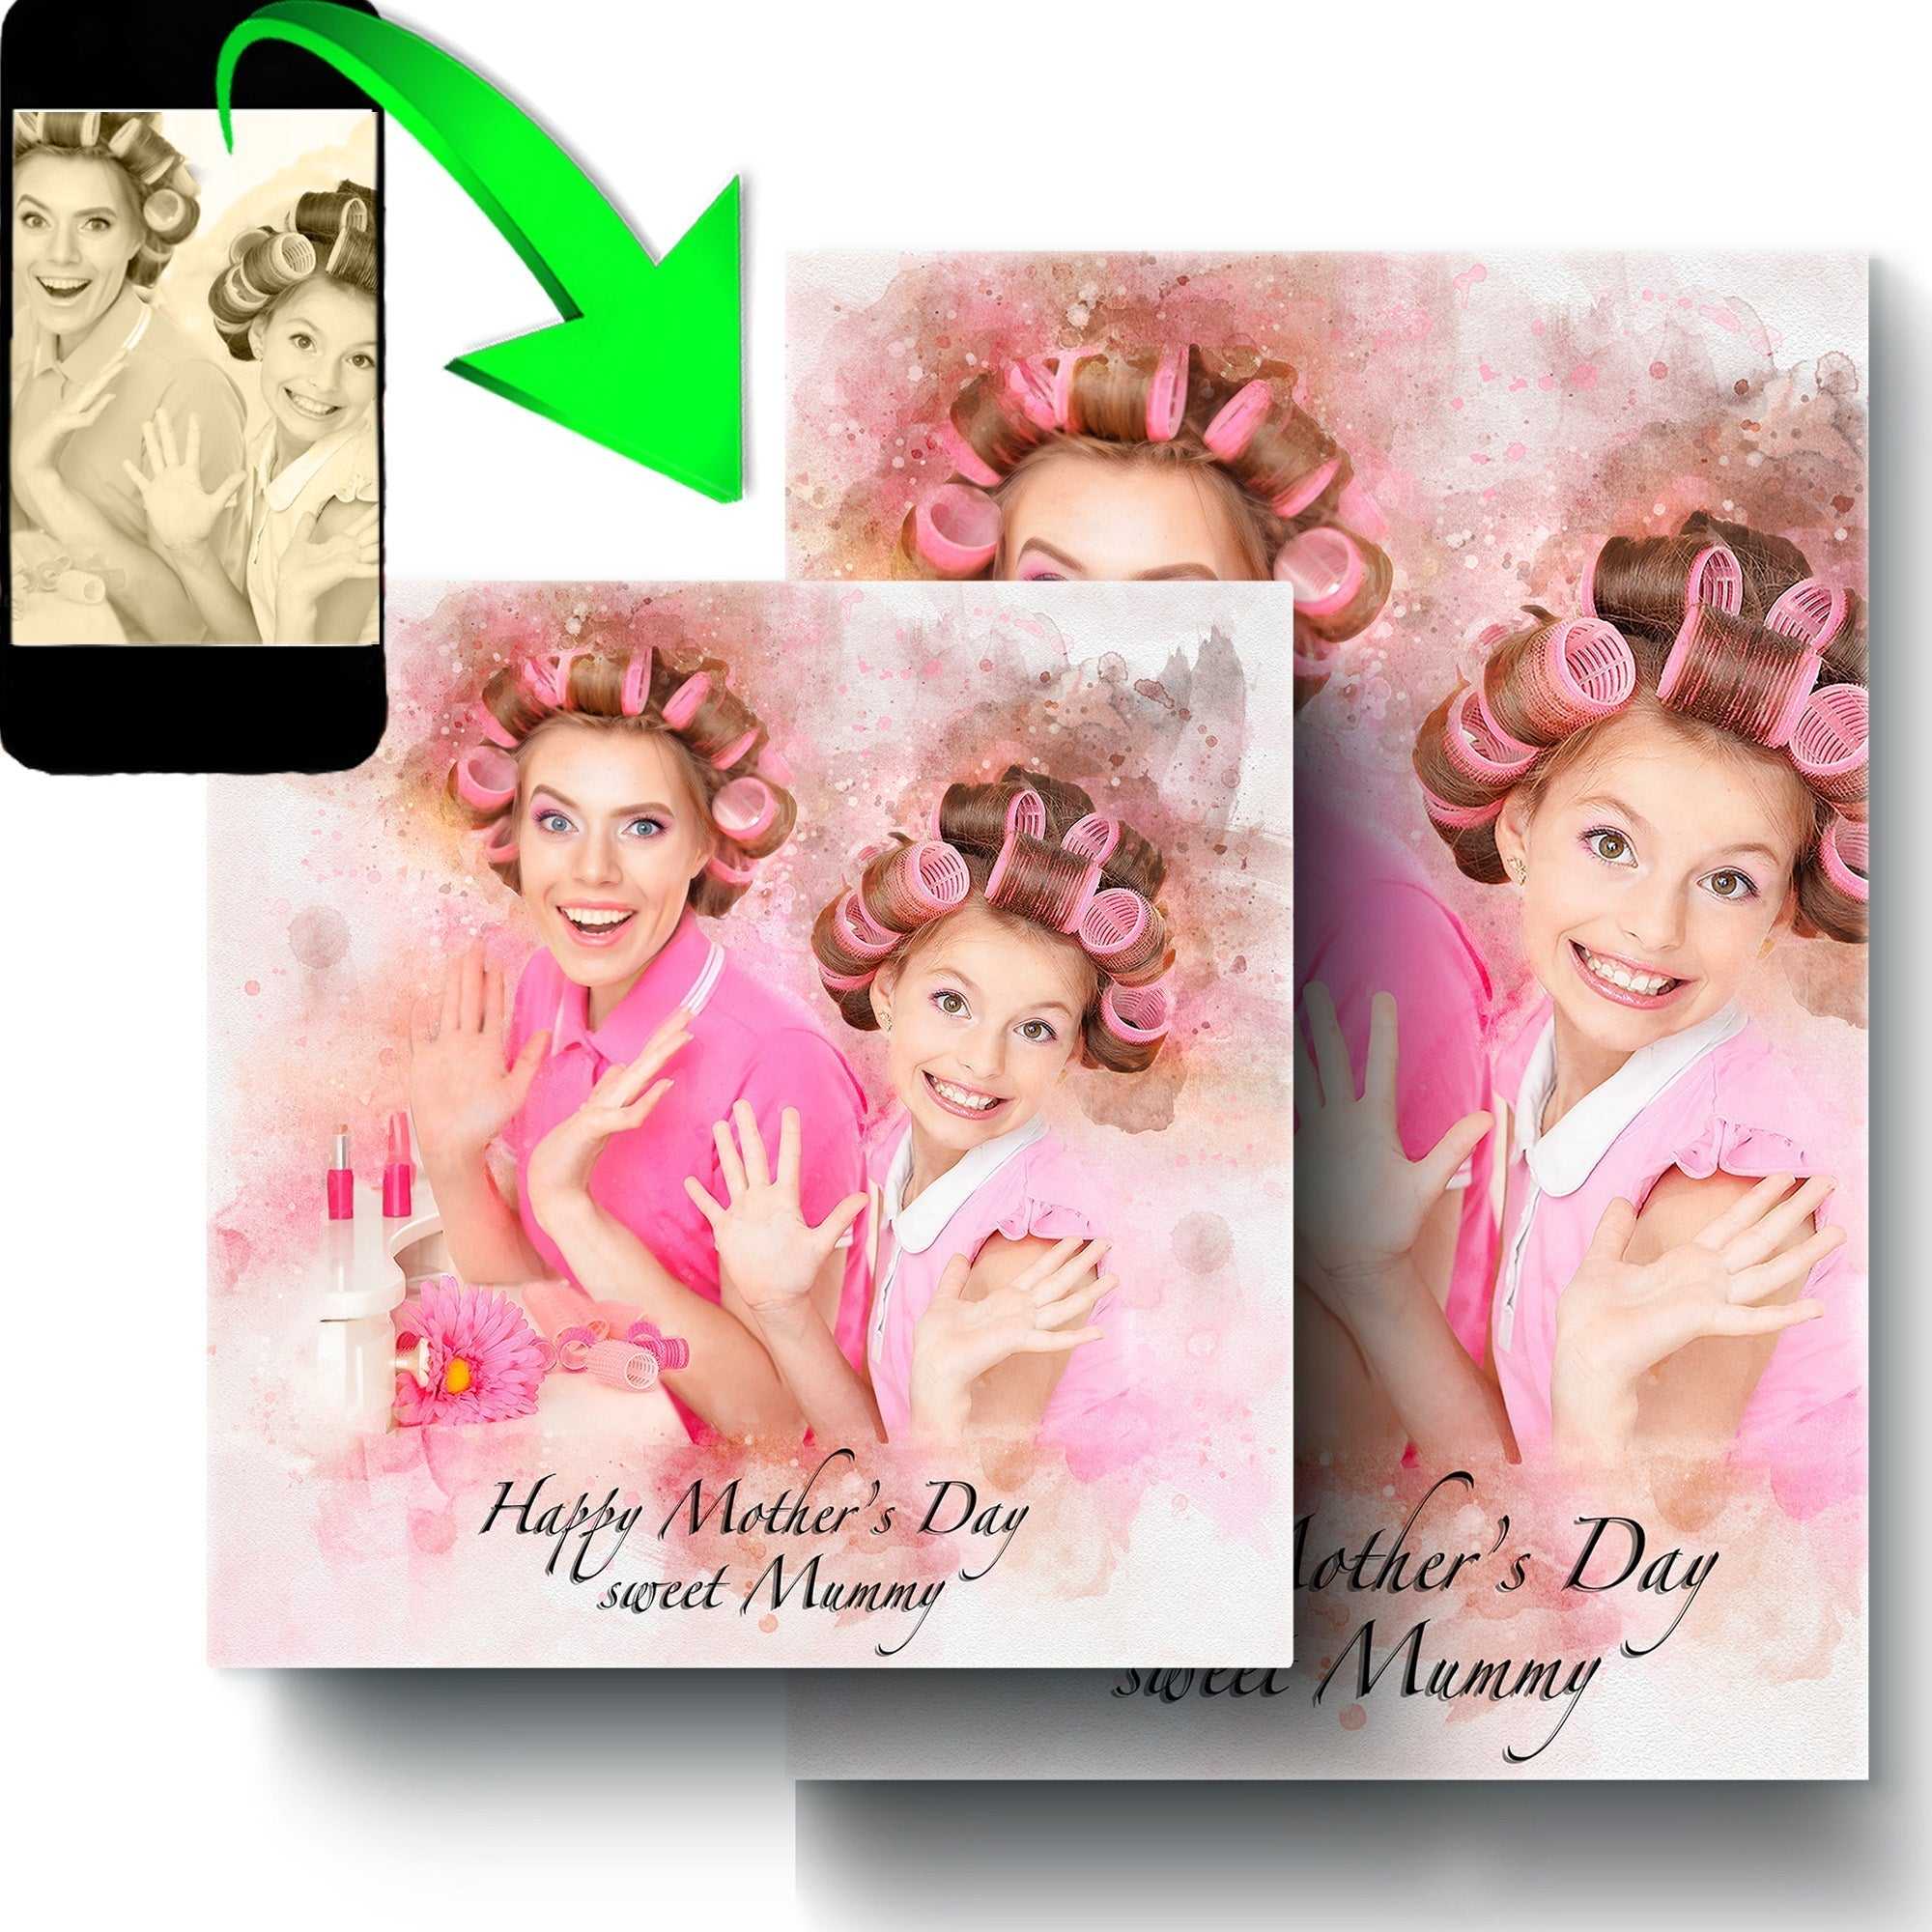 Pictures to Paint | Custom Portrait Painting | From Photo to Painting - FromPicToArt